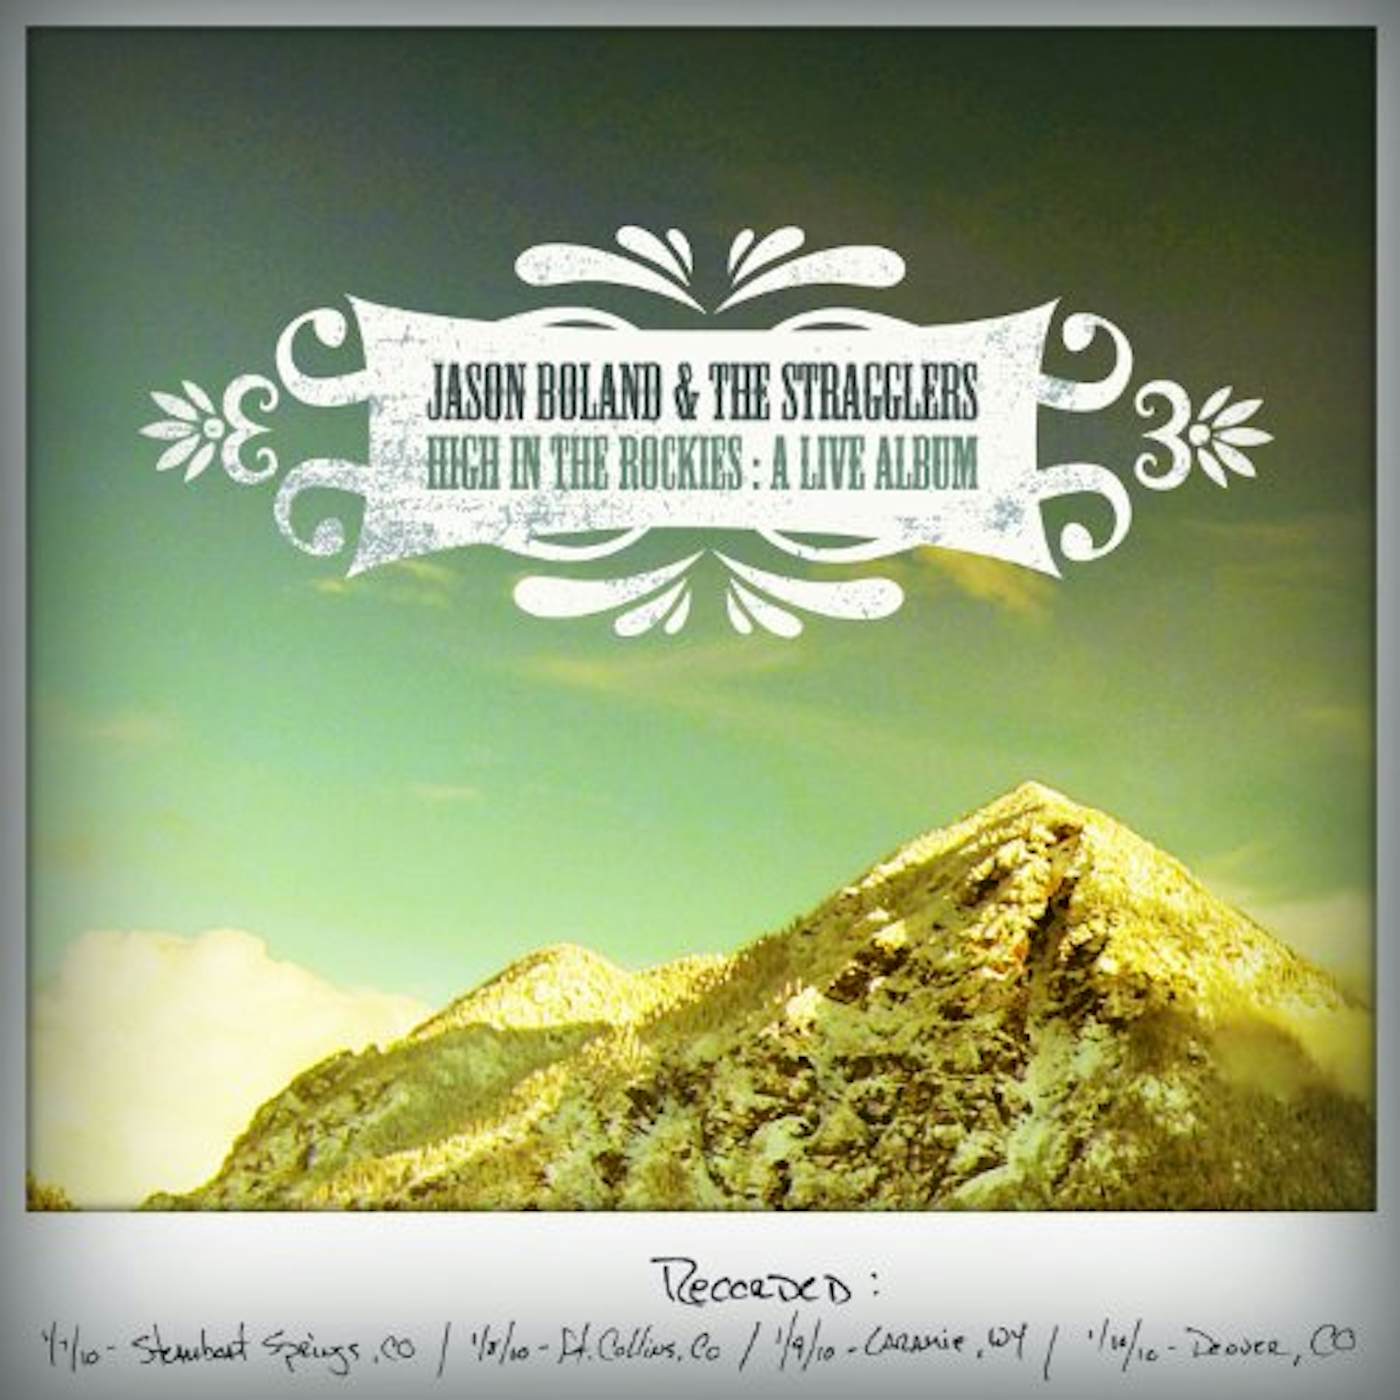 Jason Boland & The Stragglers HIGH IN THE ROCKIES CD